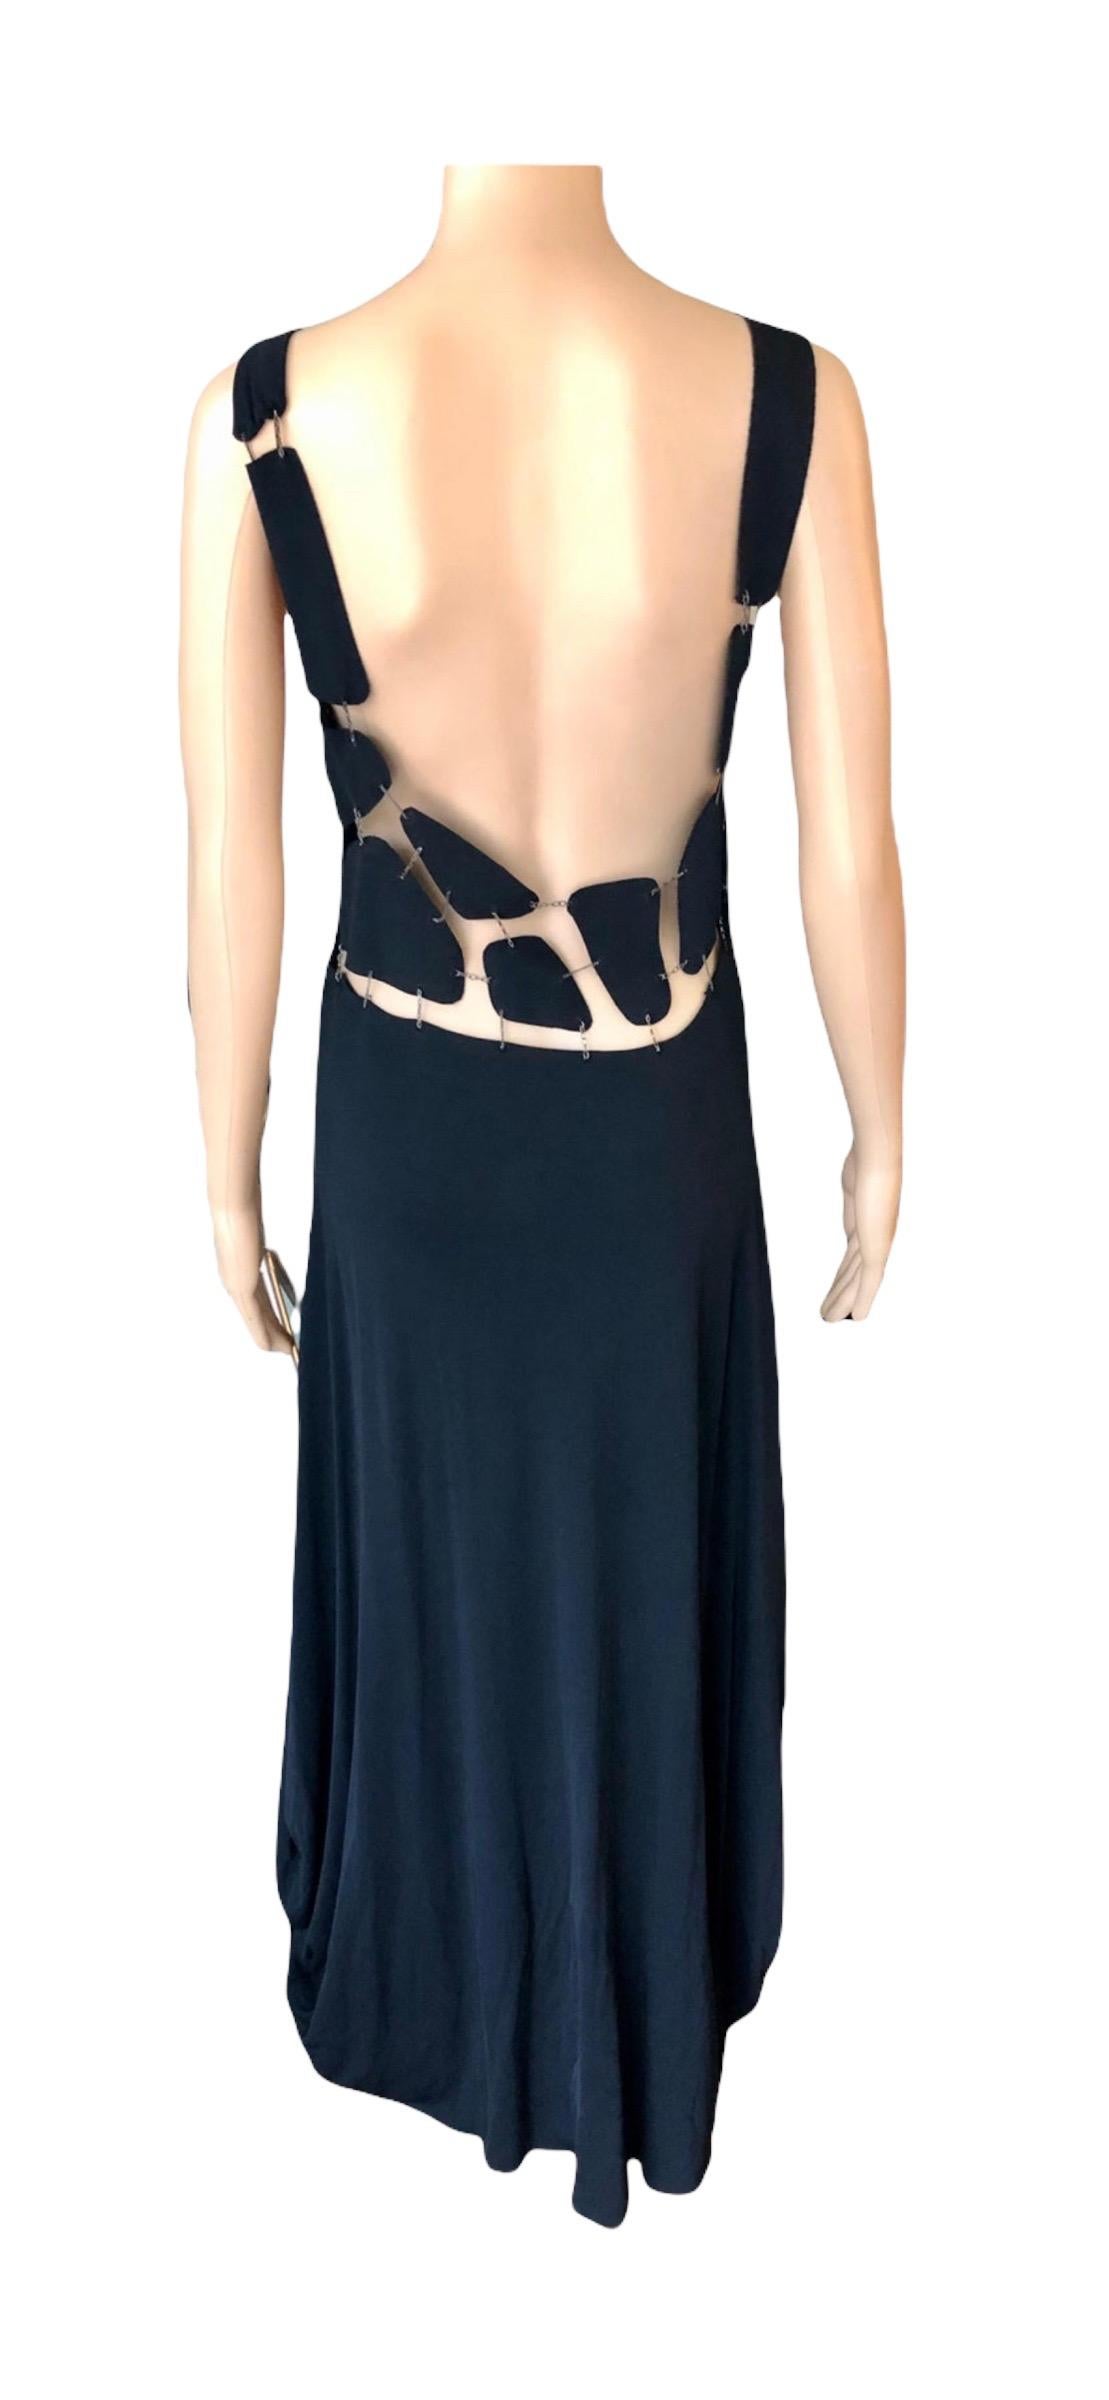 Jean Paul Gaultier S/S 2003 Chain Embellished Open Back Black Evening Dress Gown For Sale 3